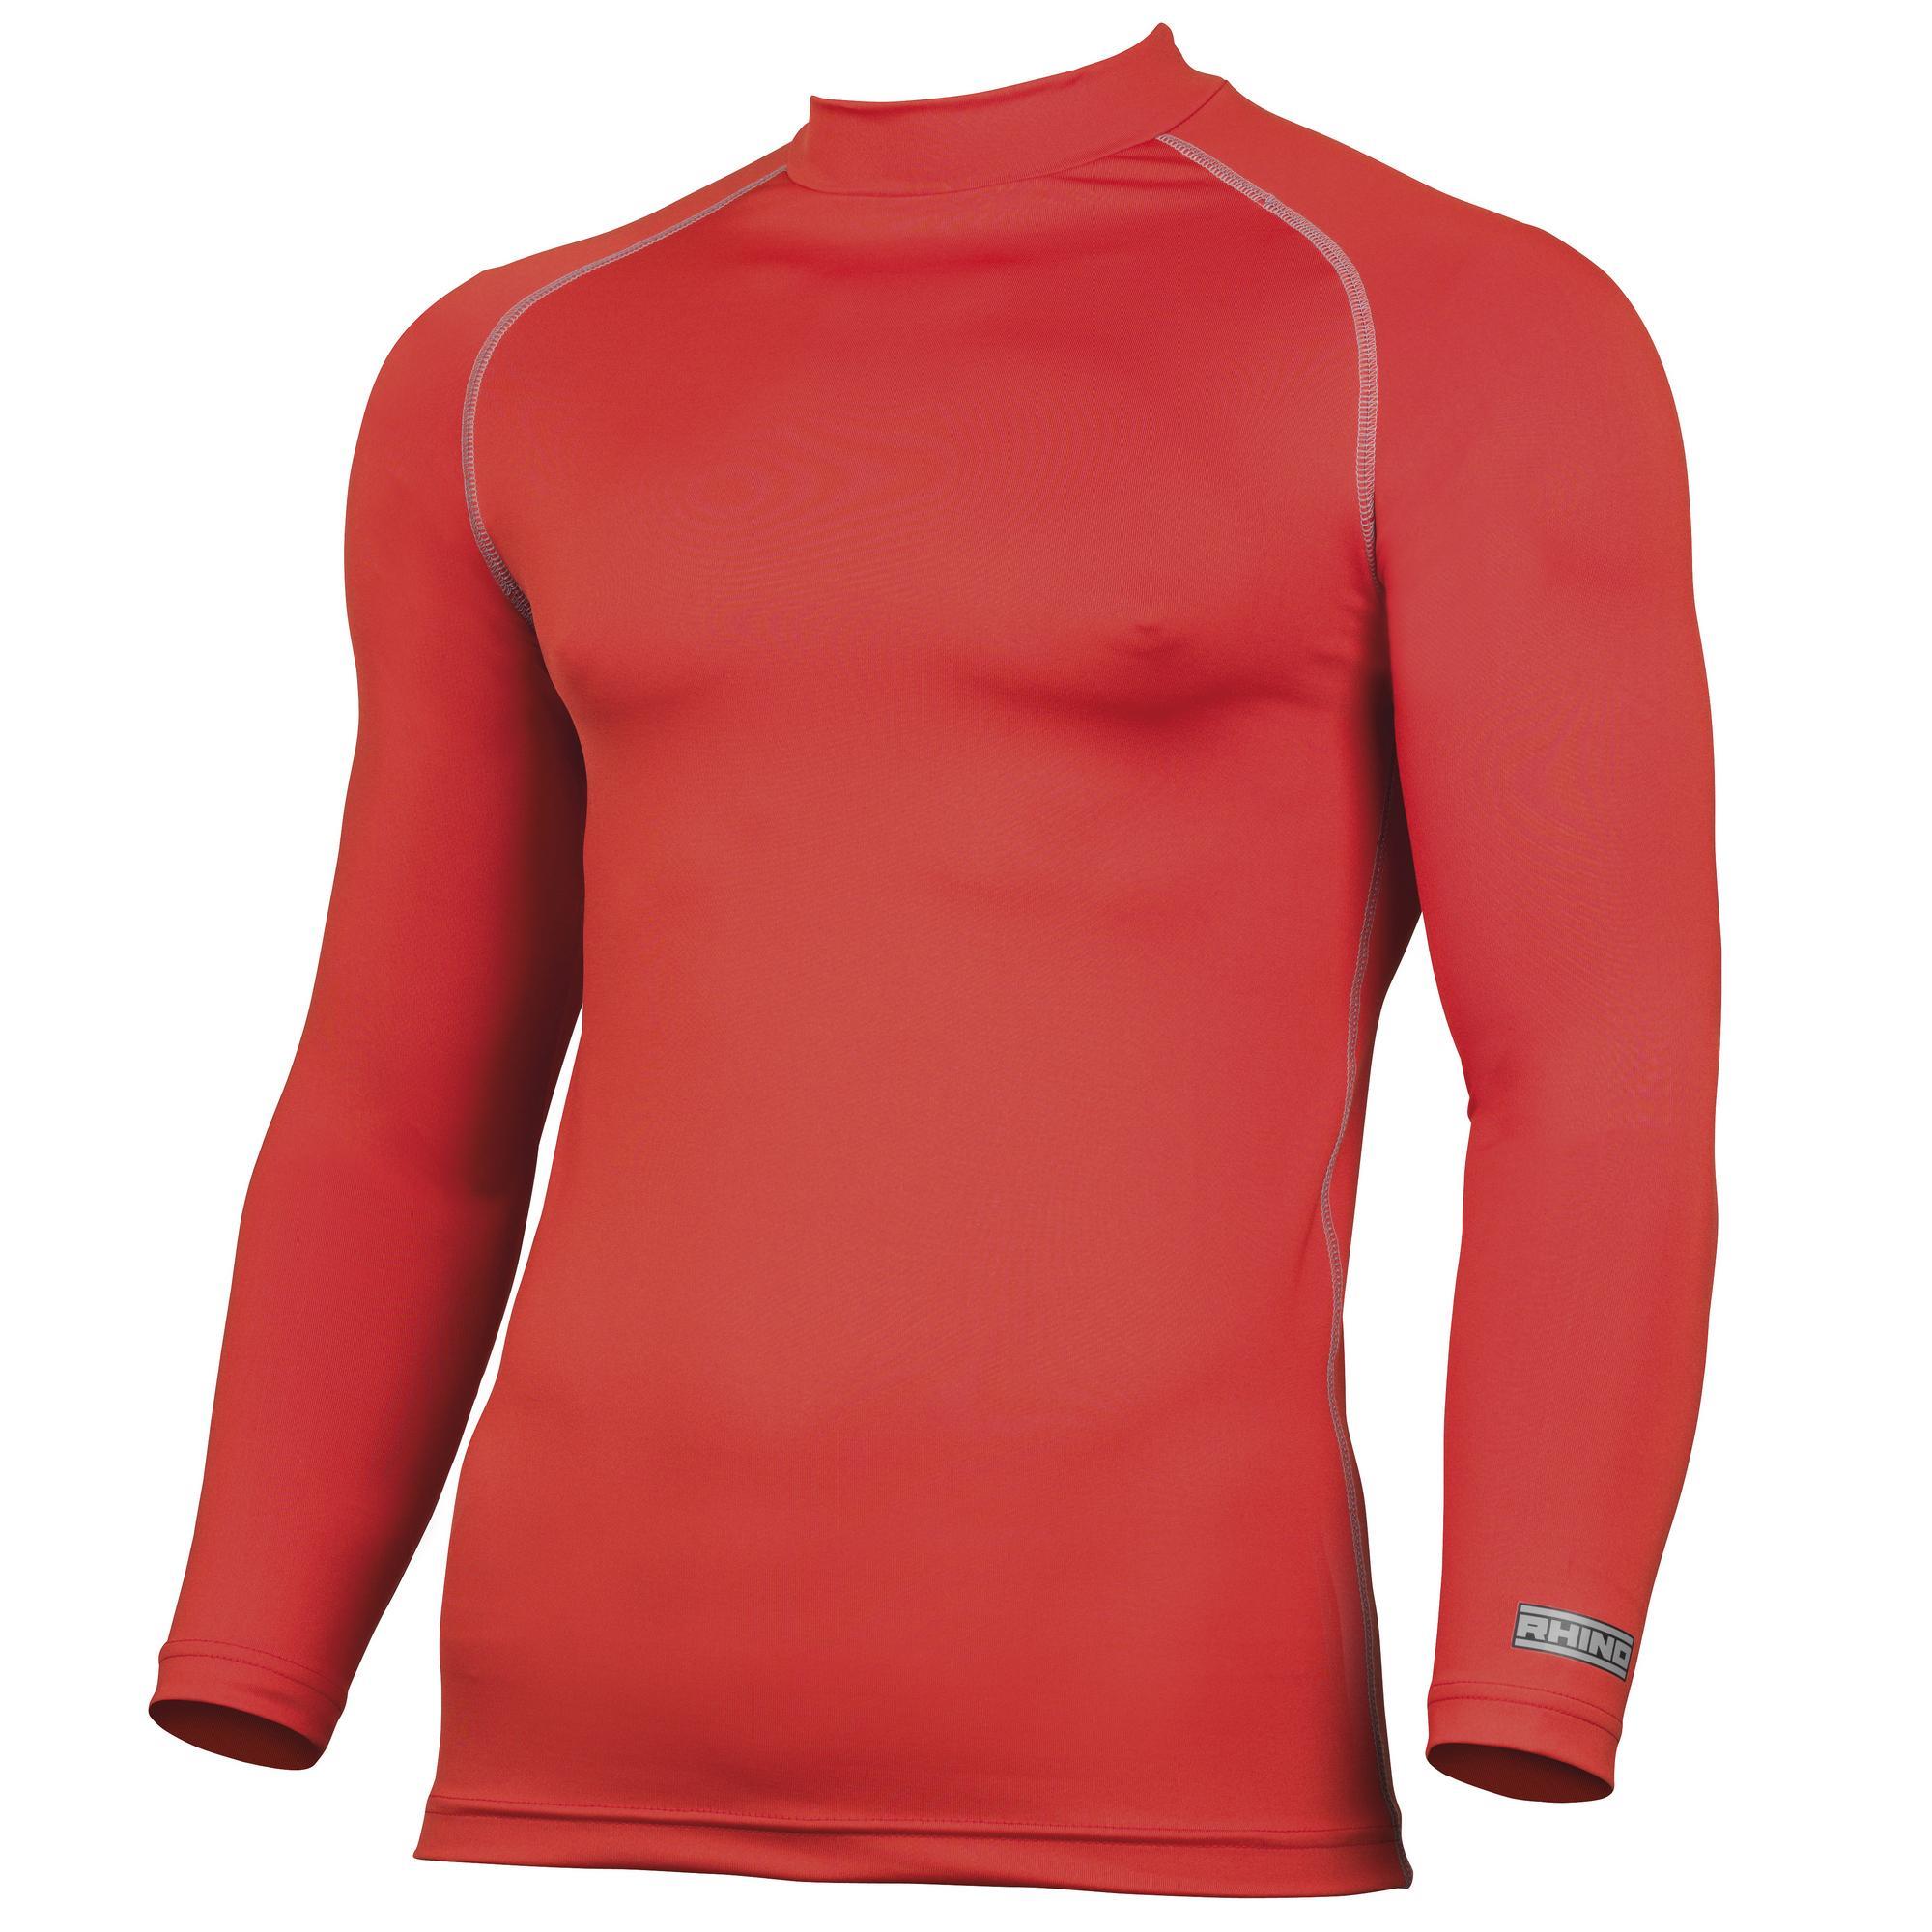 Rhino Mens Thermal Underwear Long Sleeve Base Layer Vest Top (Red) (2XL)